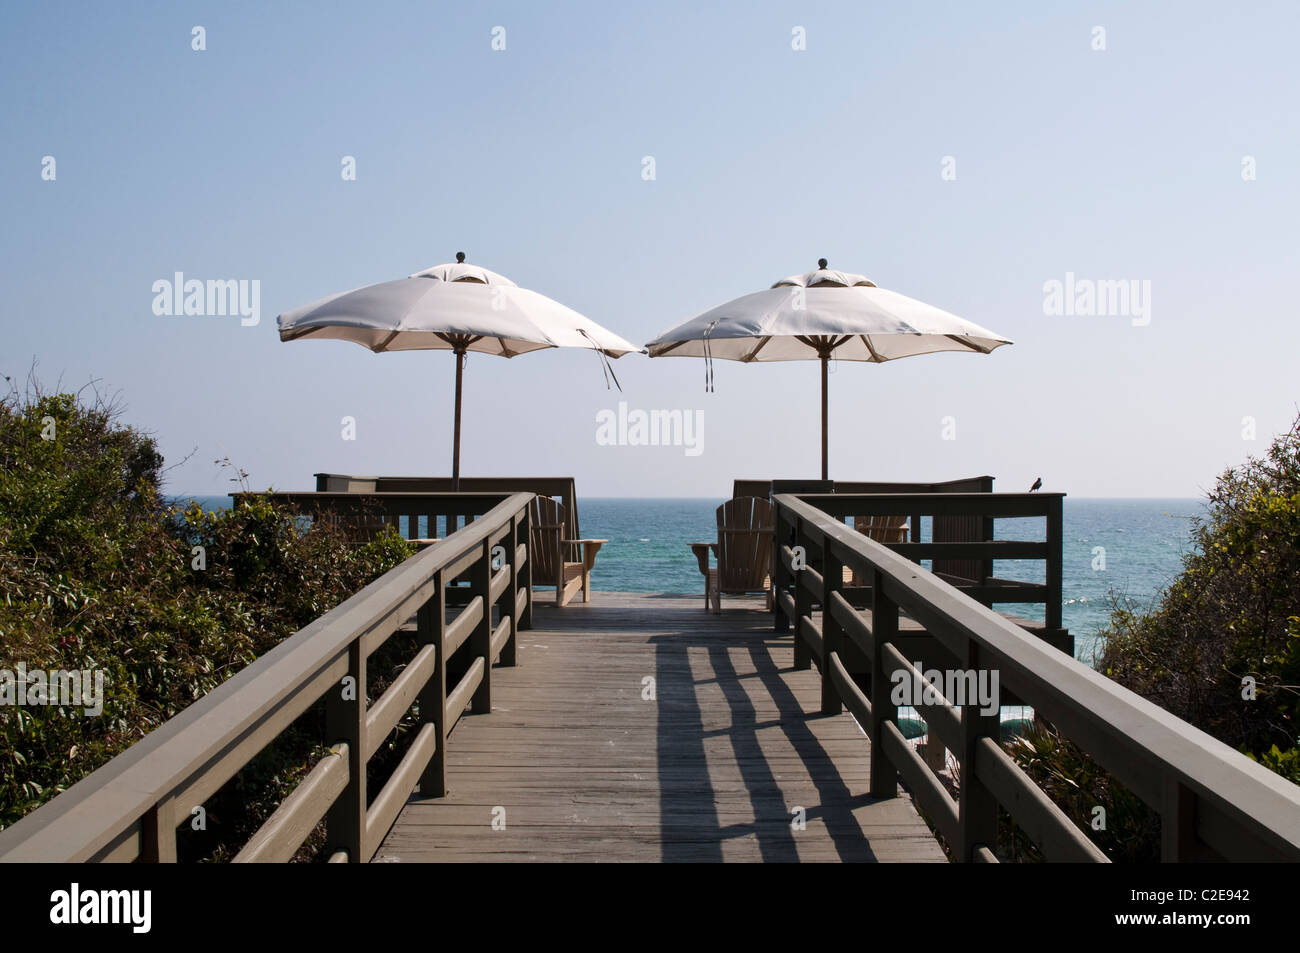 Two umbrellas offer shade and relaxation overlooking the Gulf of Mexico in Rosemary Beach, Florida. Stock Photo